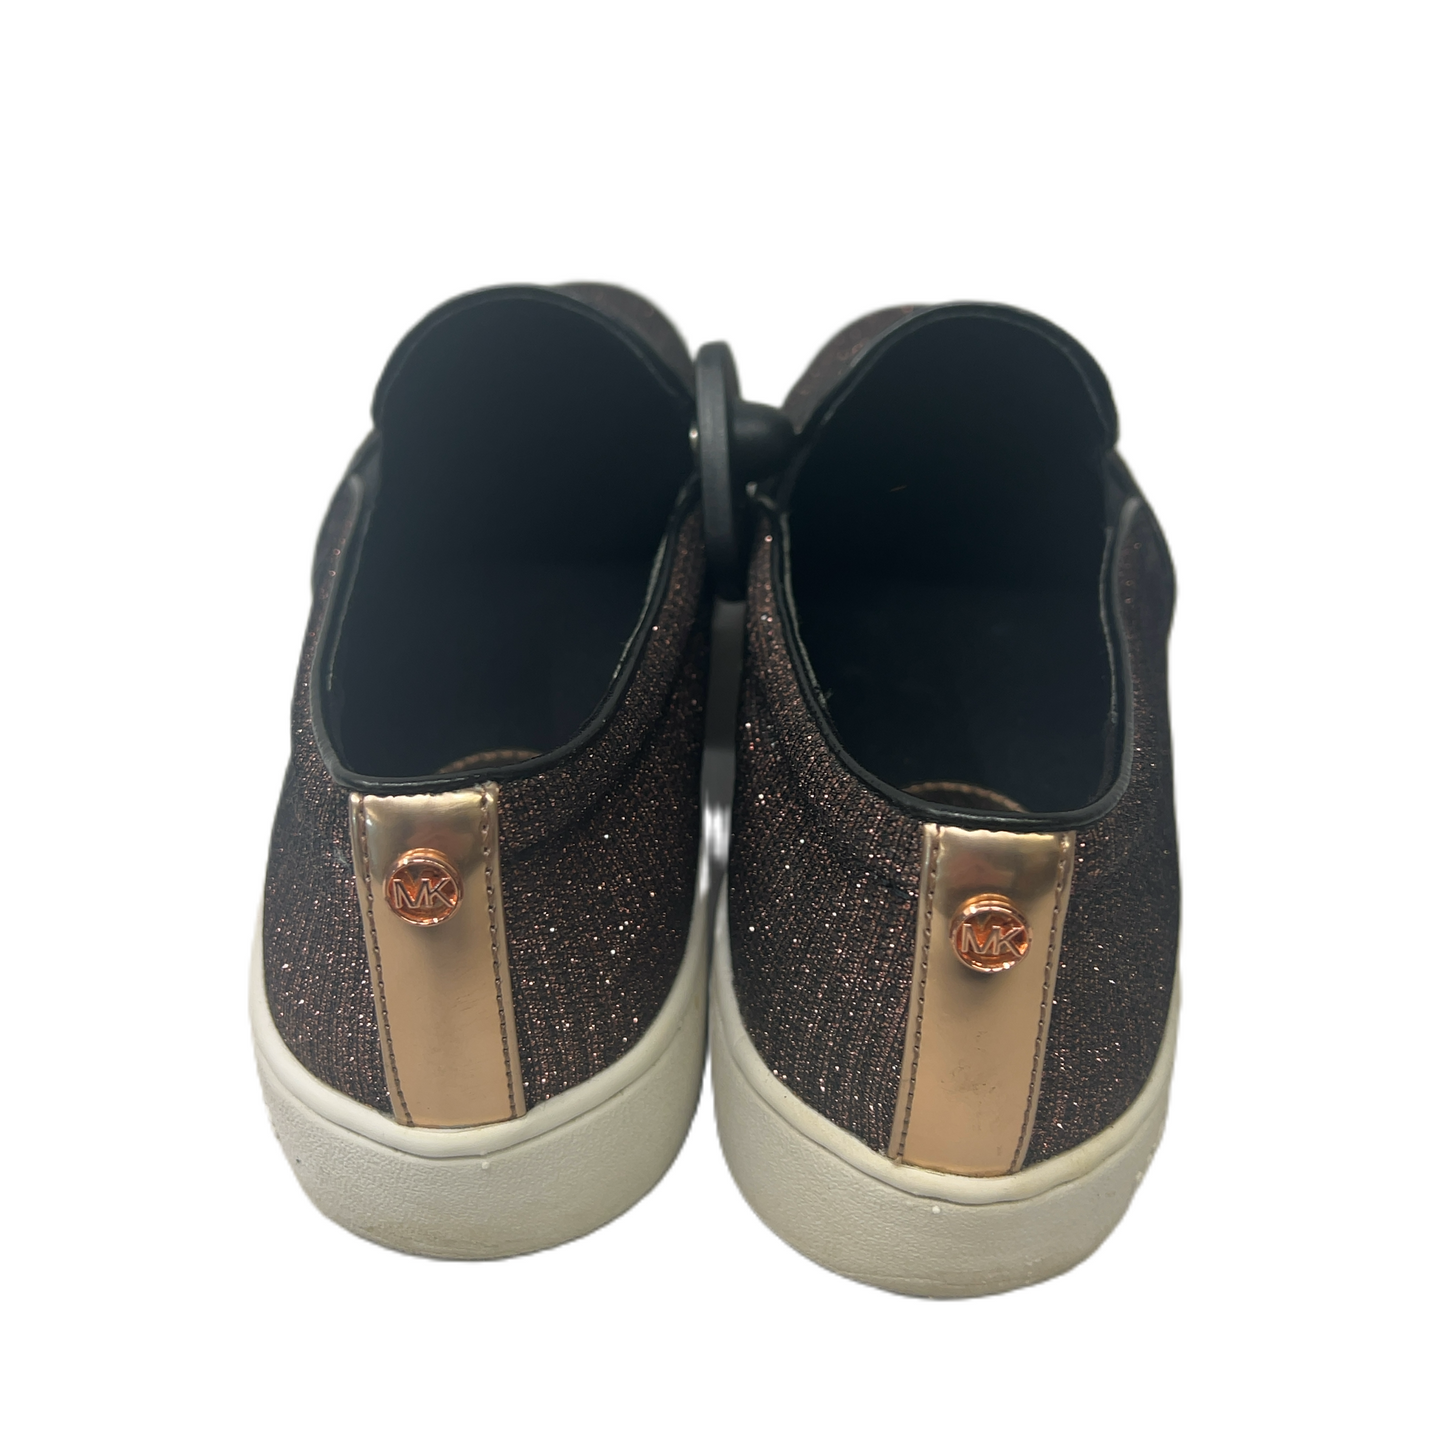 Shoes Sneakers By Michael By Michael Kors  Size: 10